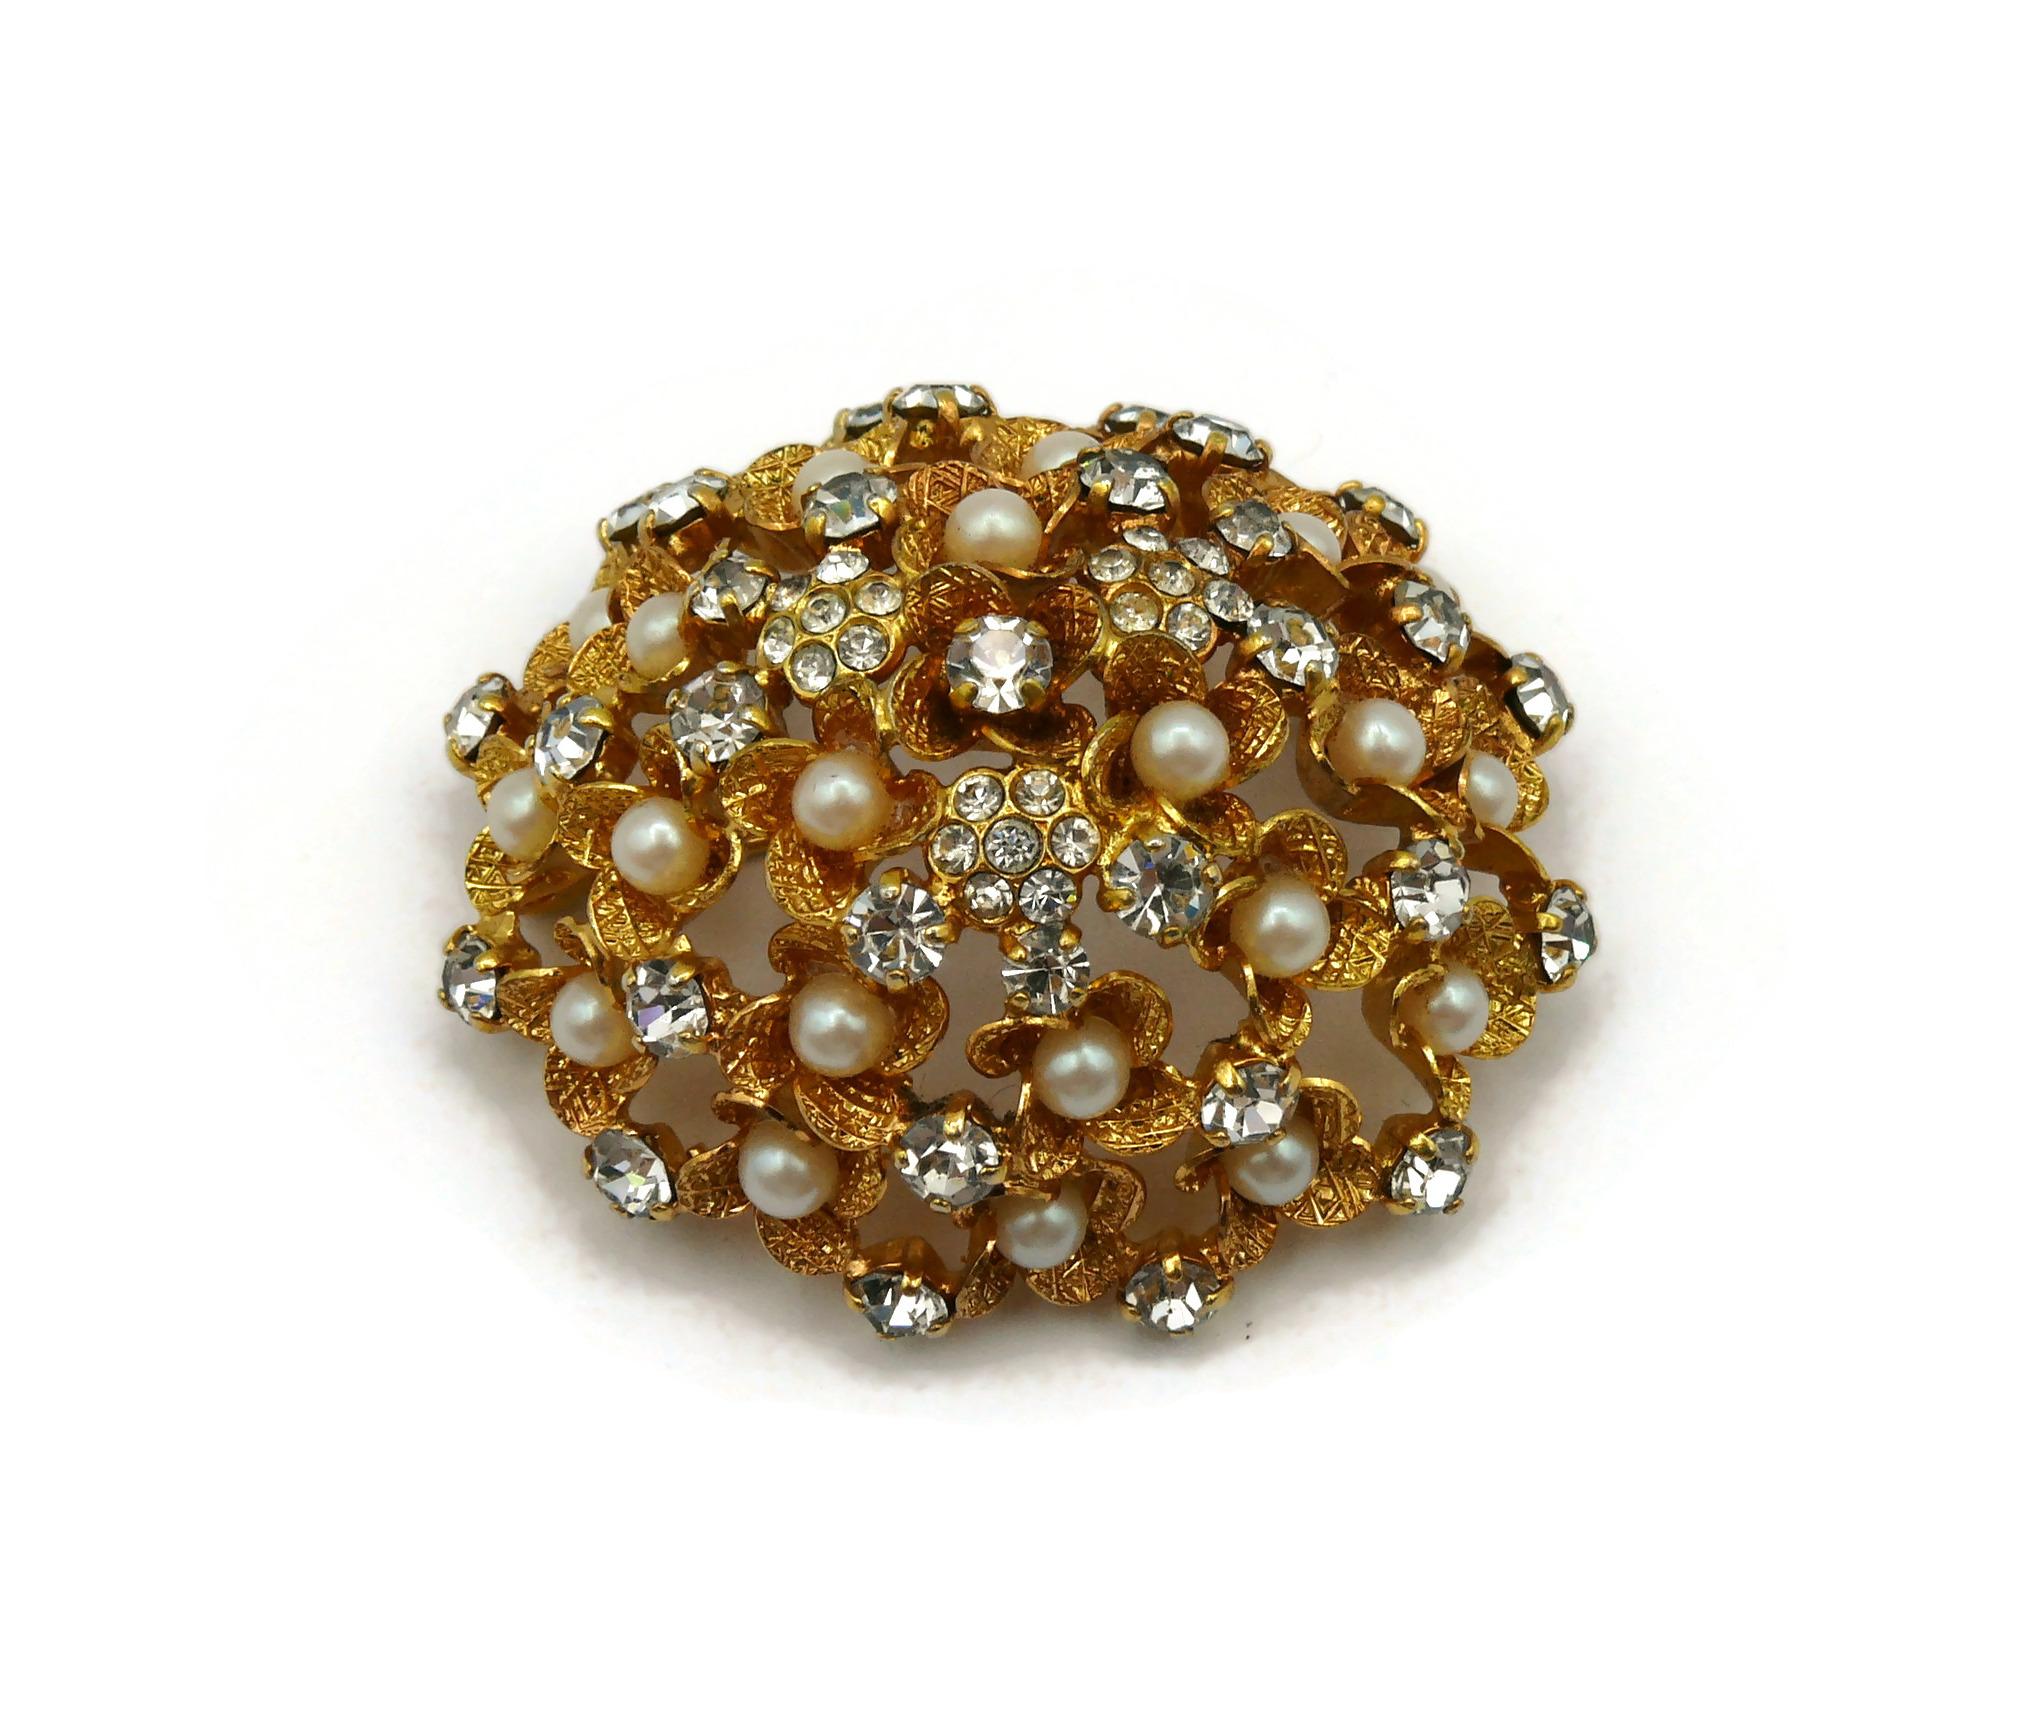 CHRISTIAN DIOR Vintage Jewelled Gold Tone Domed Brooch, 1966 For Sale 3